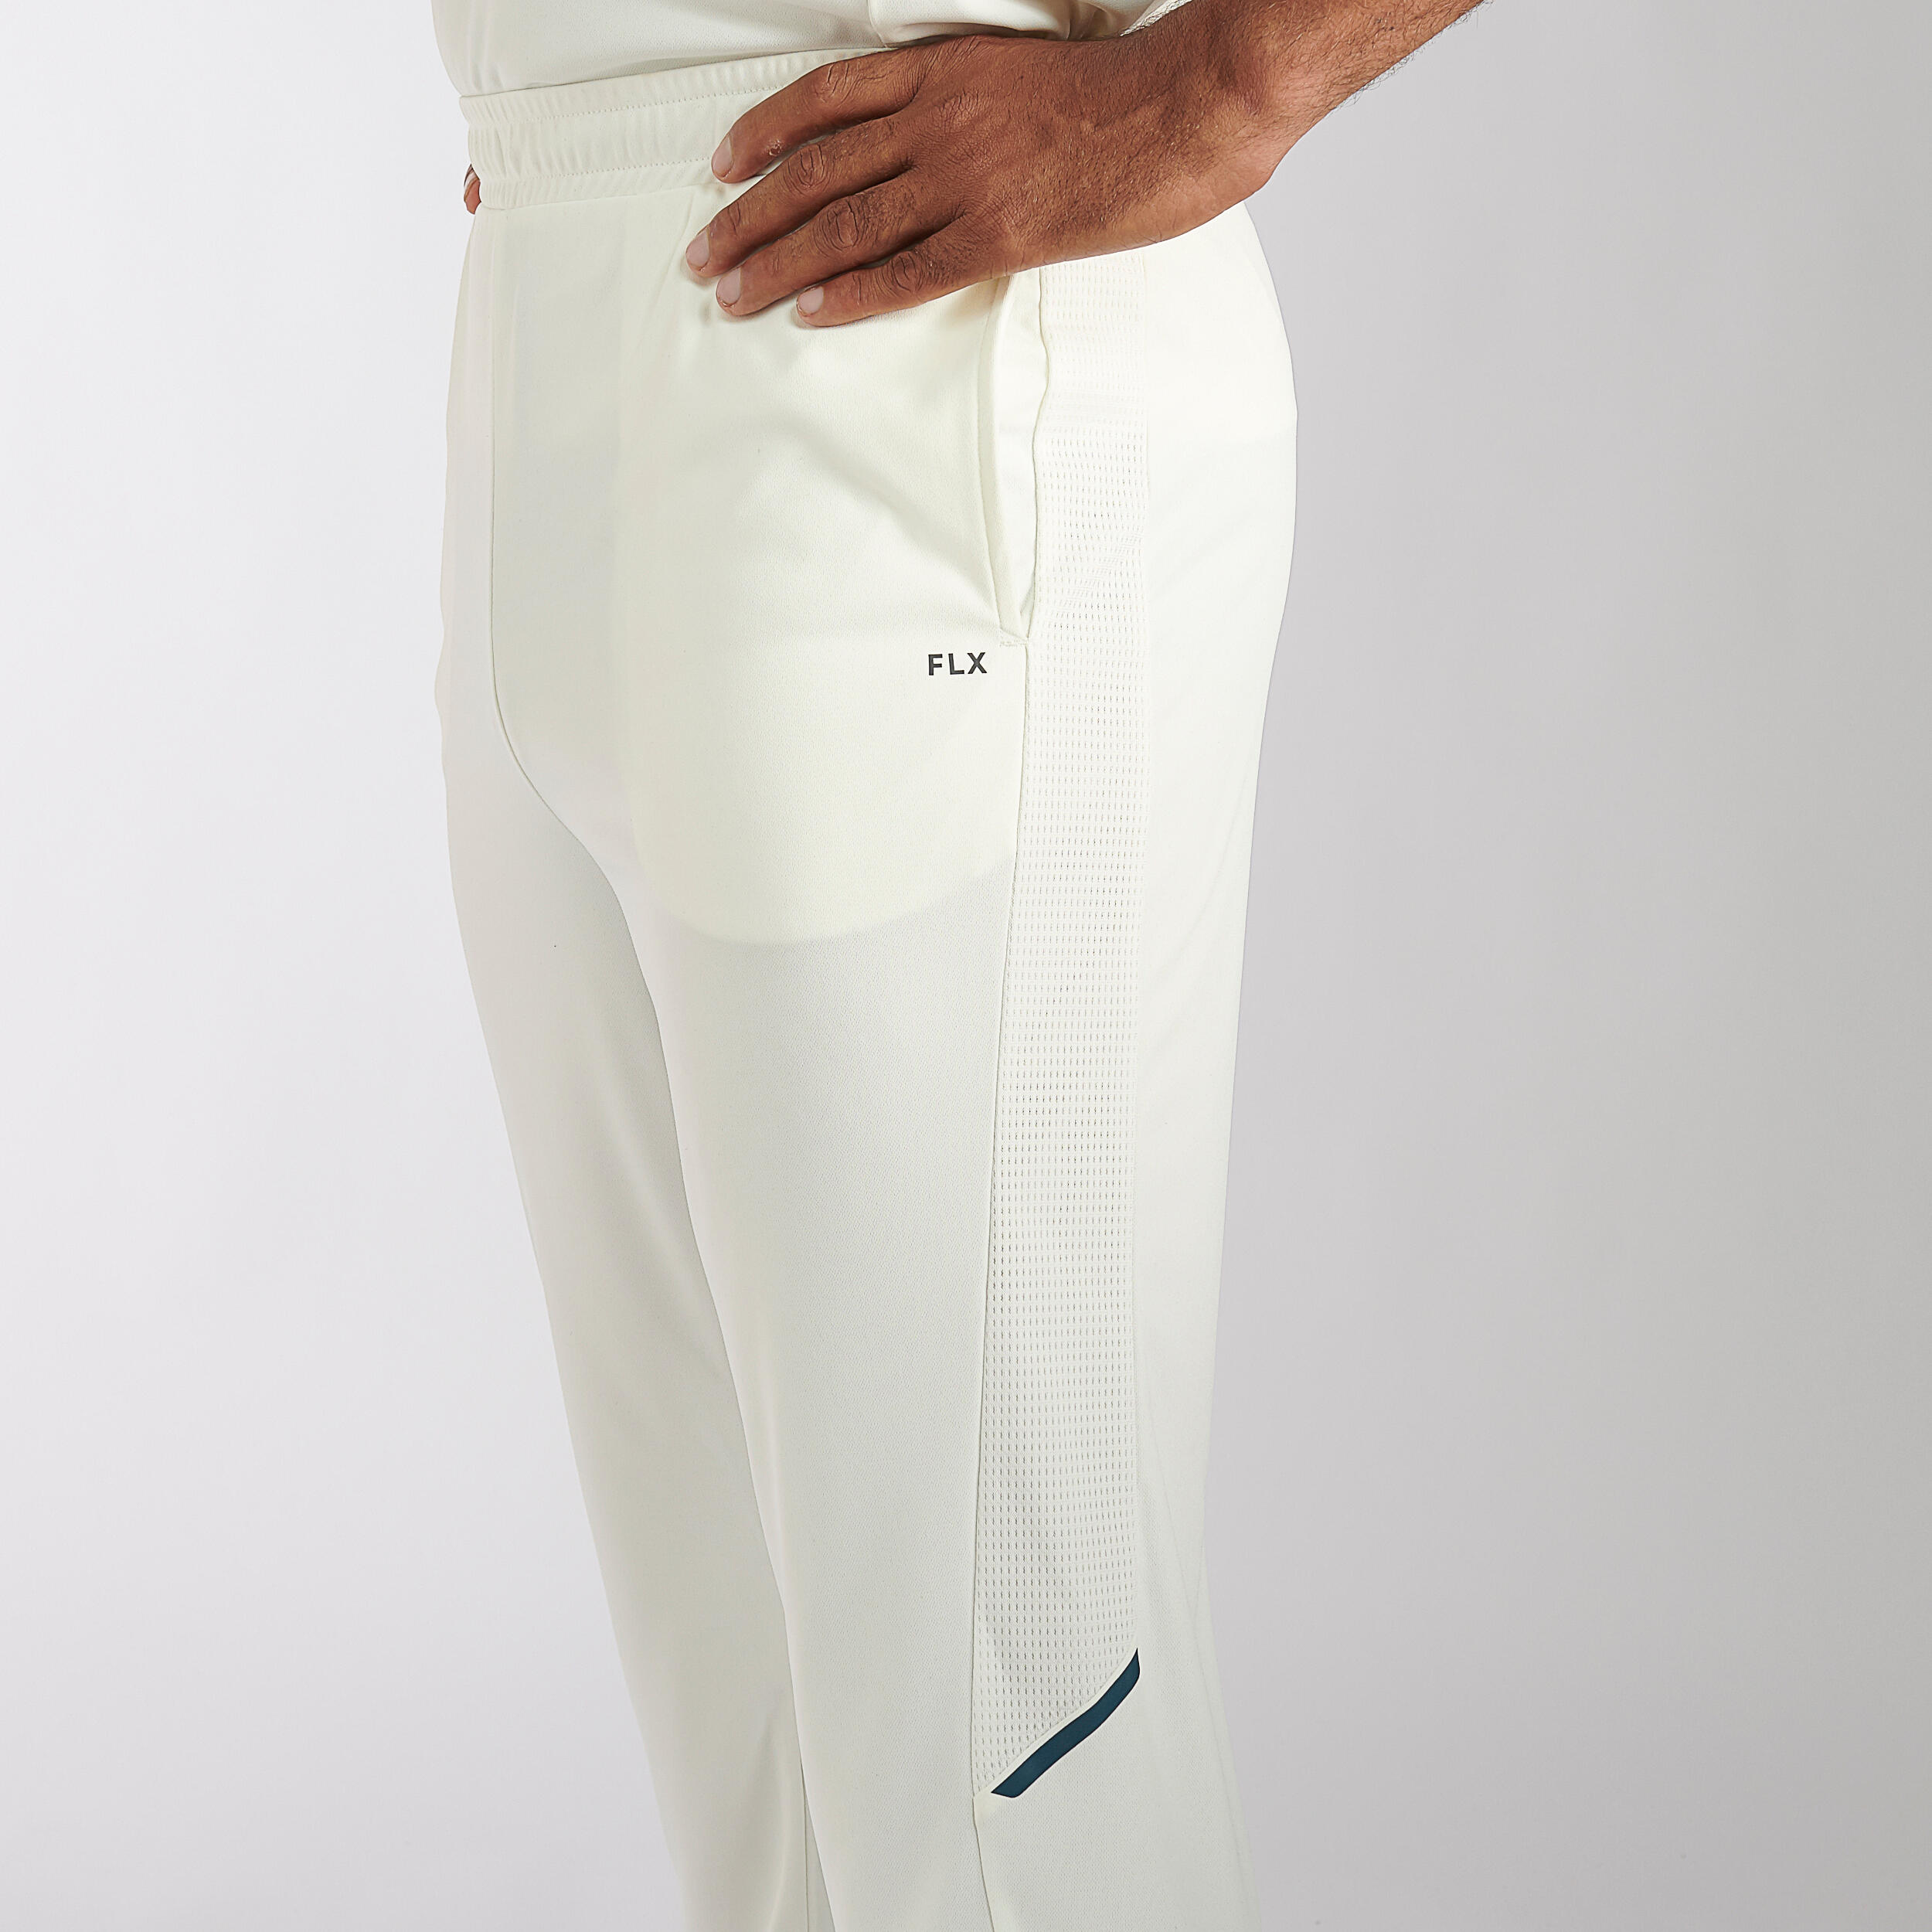 Decathlon Sports India  Atria  Clearance sale on Cricket Track pants   All at 449 only at Decathlon Atria sale cricket flx decathlonatria   Facebook